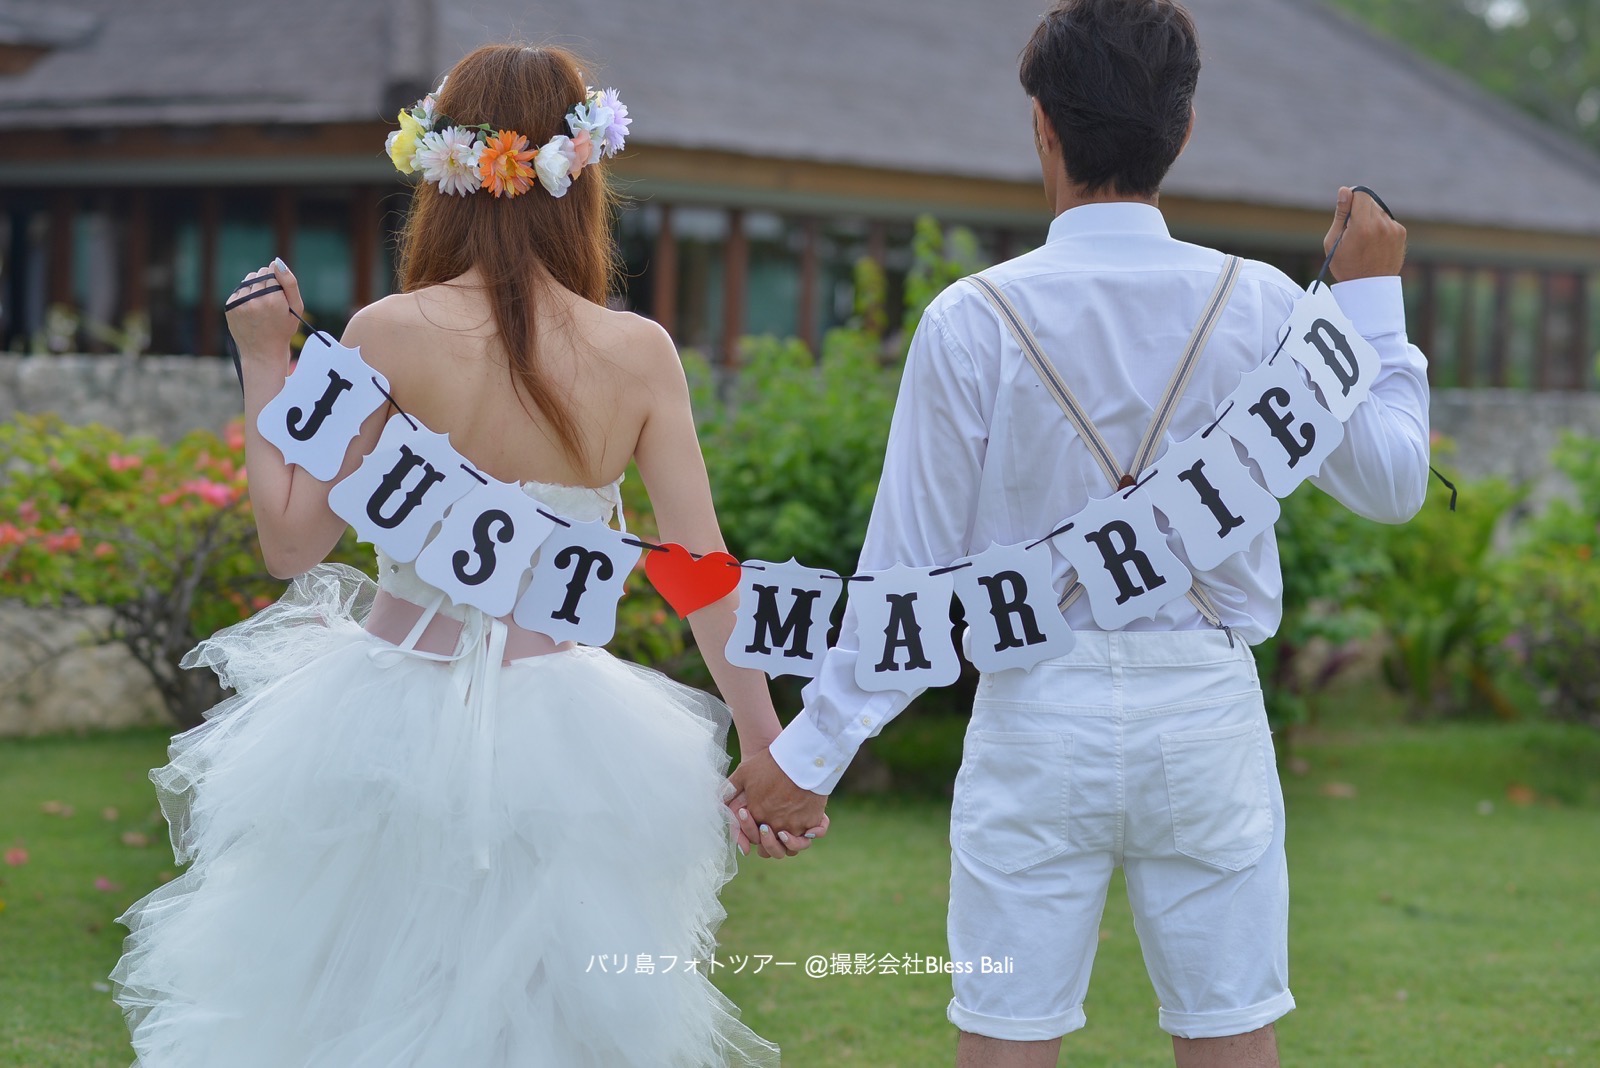 Just Marriedのガーランド